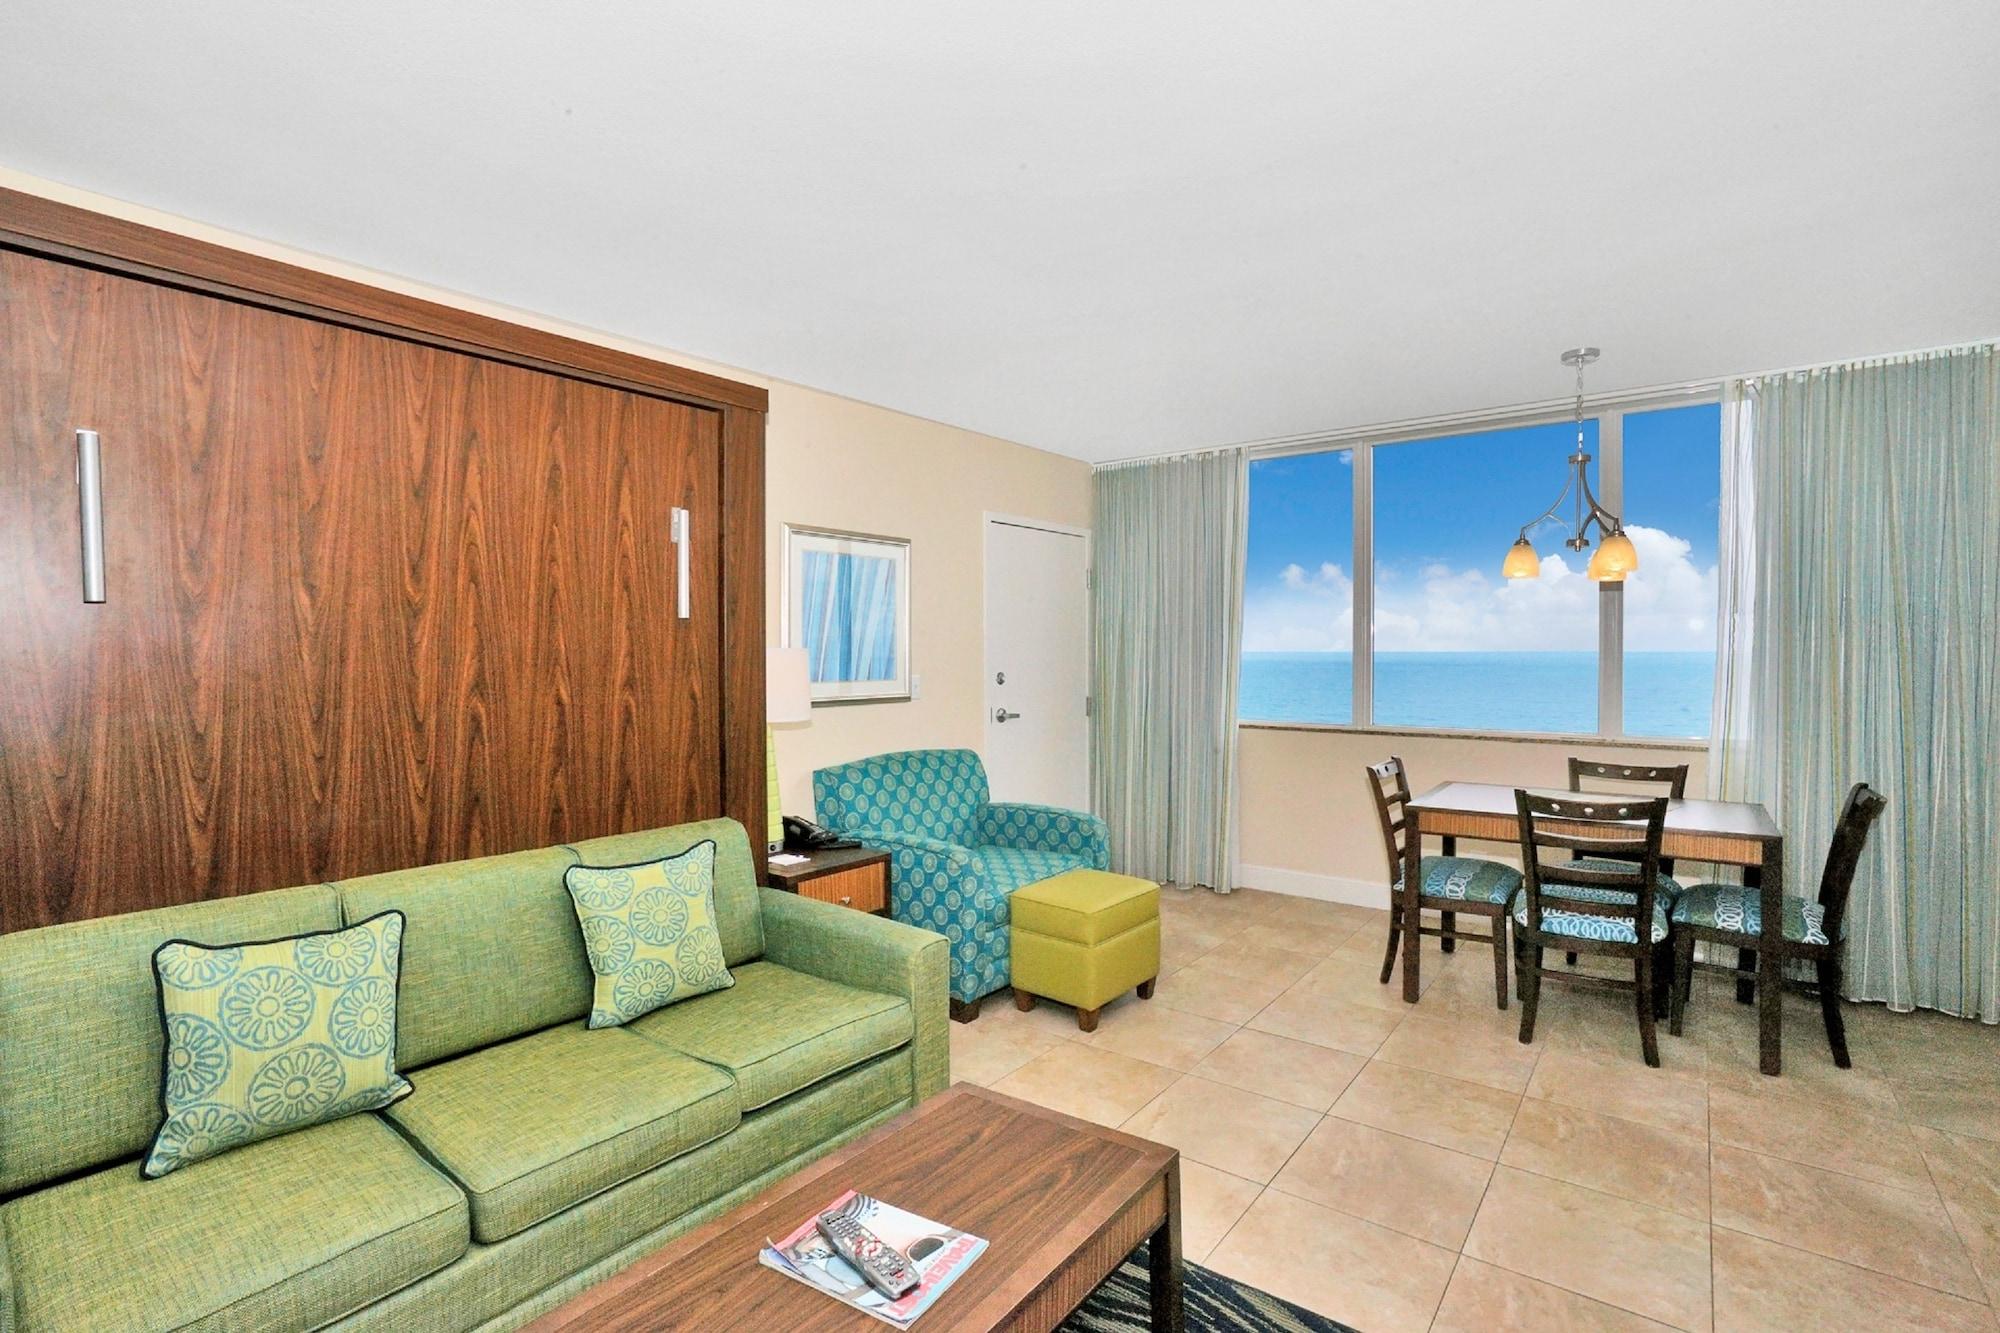 Hollywood Beach Tower By Capital Vacations Bagian luar foto